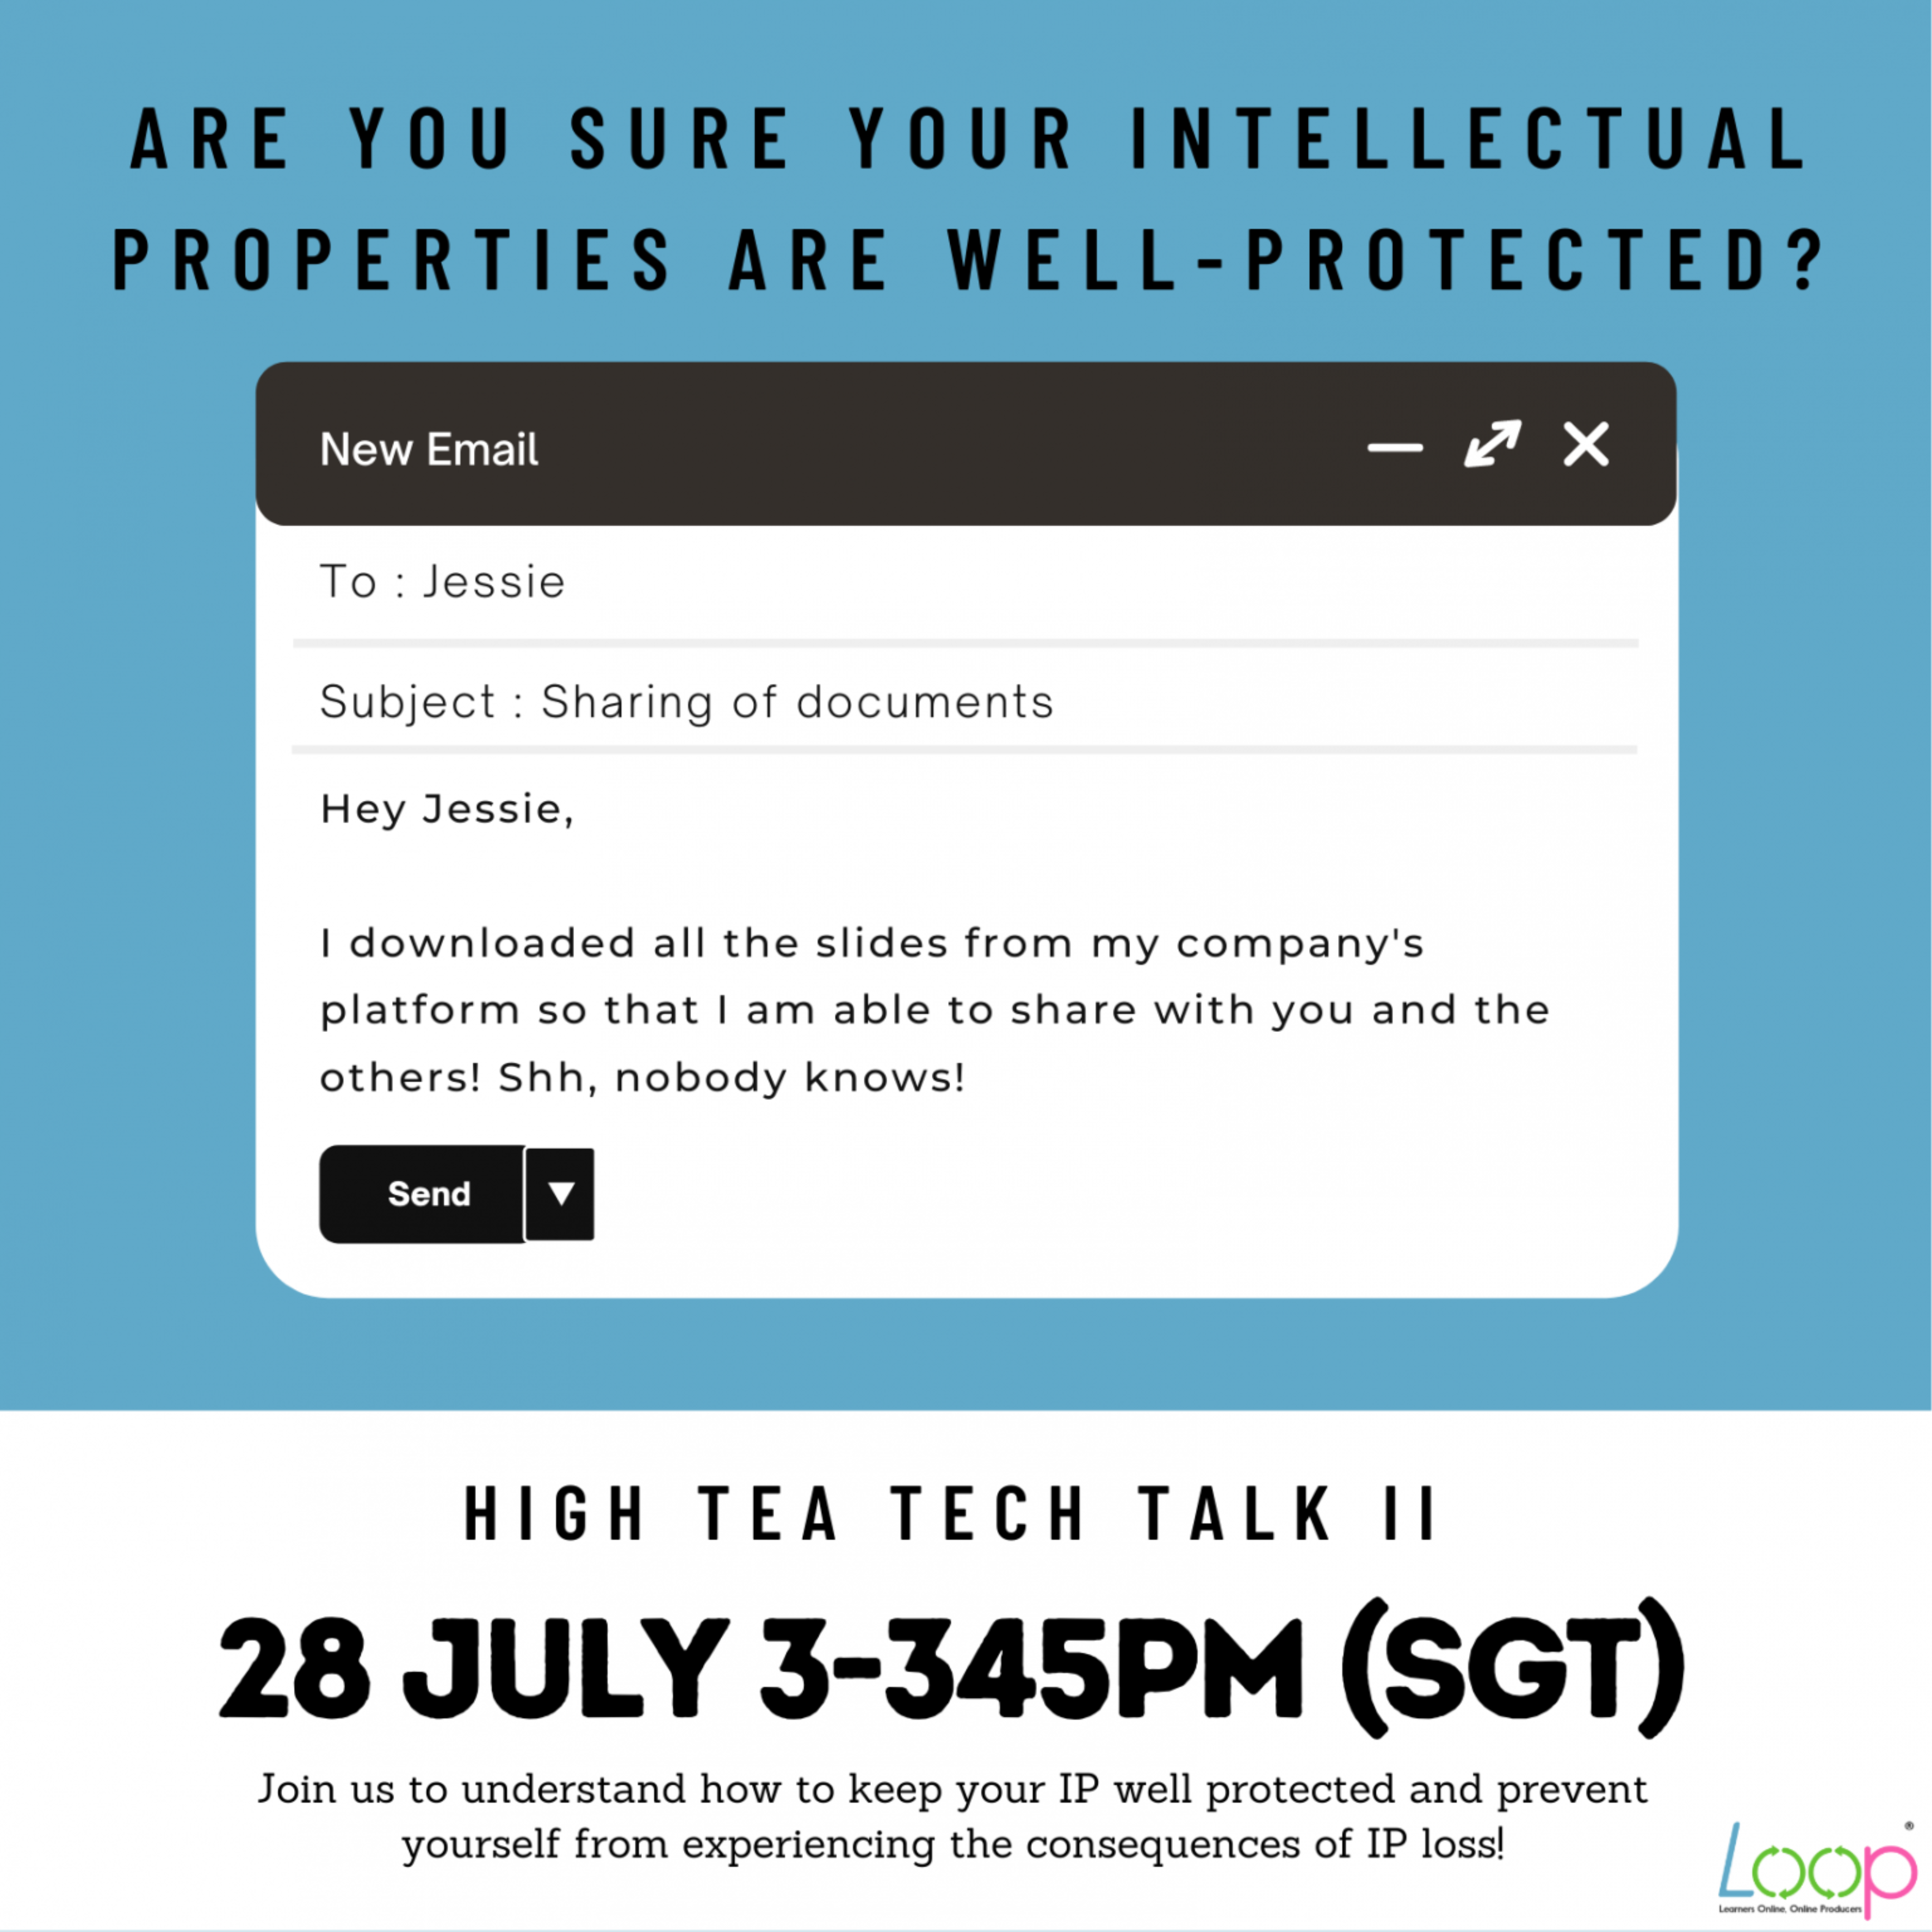 High Tea Tech Talk II: Are your intellectual properties well-protected?